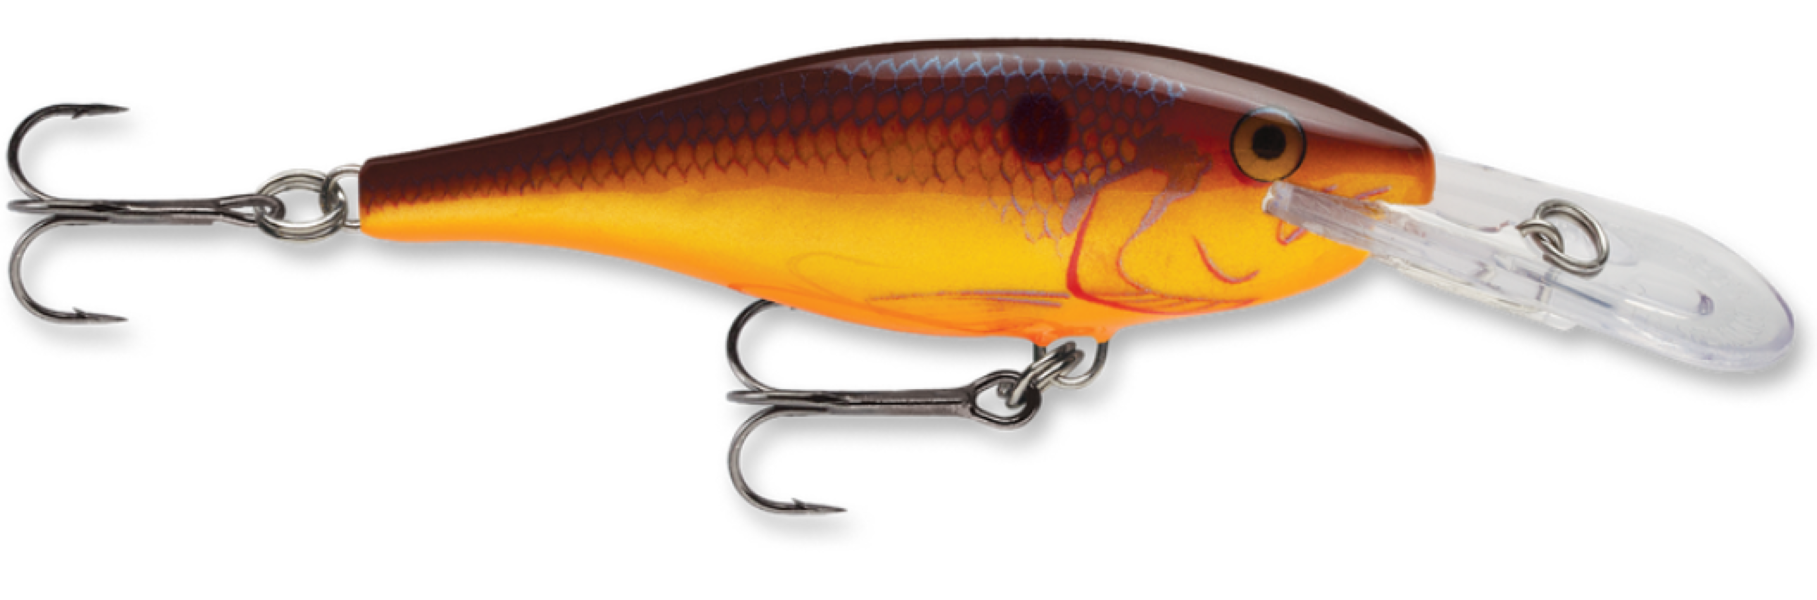 Leo Lure-Shayla Shad-Jointed 5.25 Color Golden ShinerLEO LURES-SHAYLA SHAD  JOINTED5 1/4 inches lengthThe Shayla SHAD has a lifelike fish-shaped body.  Great for casting or trolling. This shallow running lure will be ideal